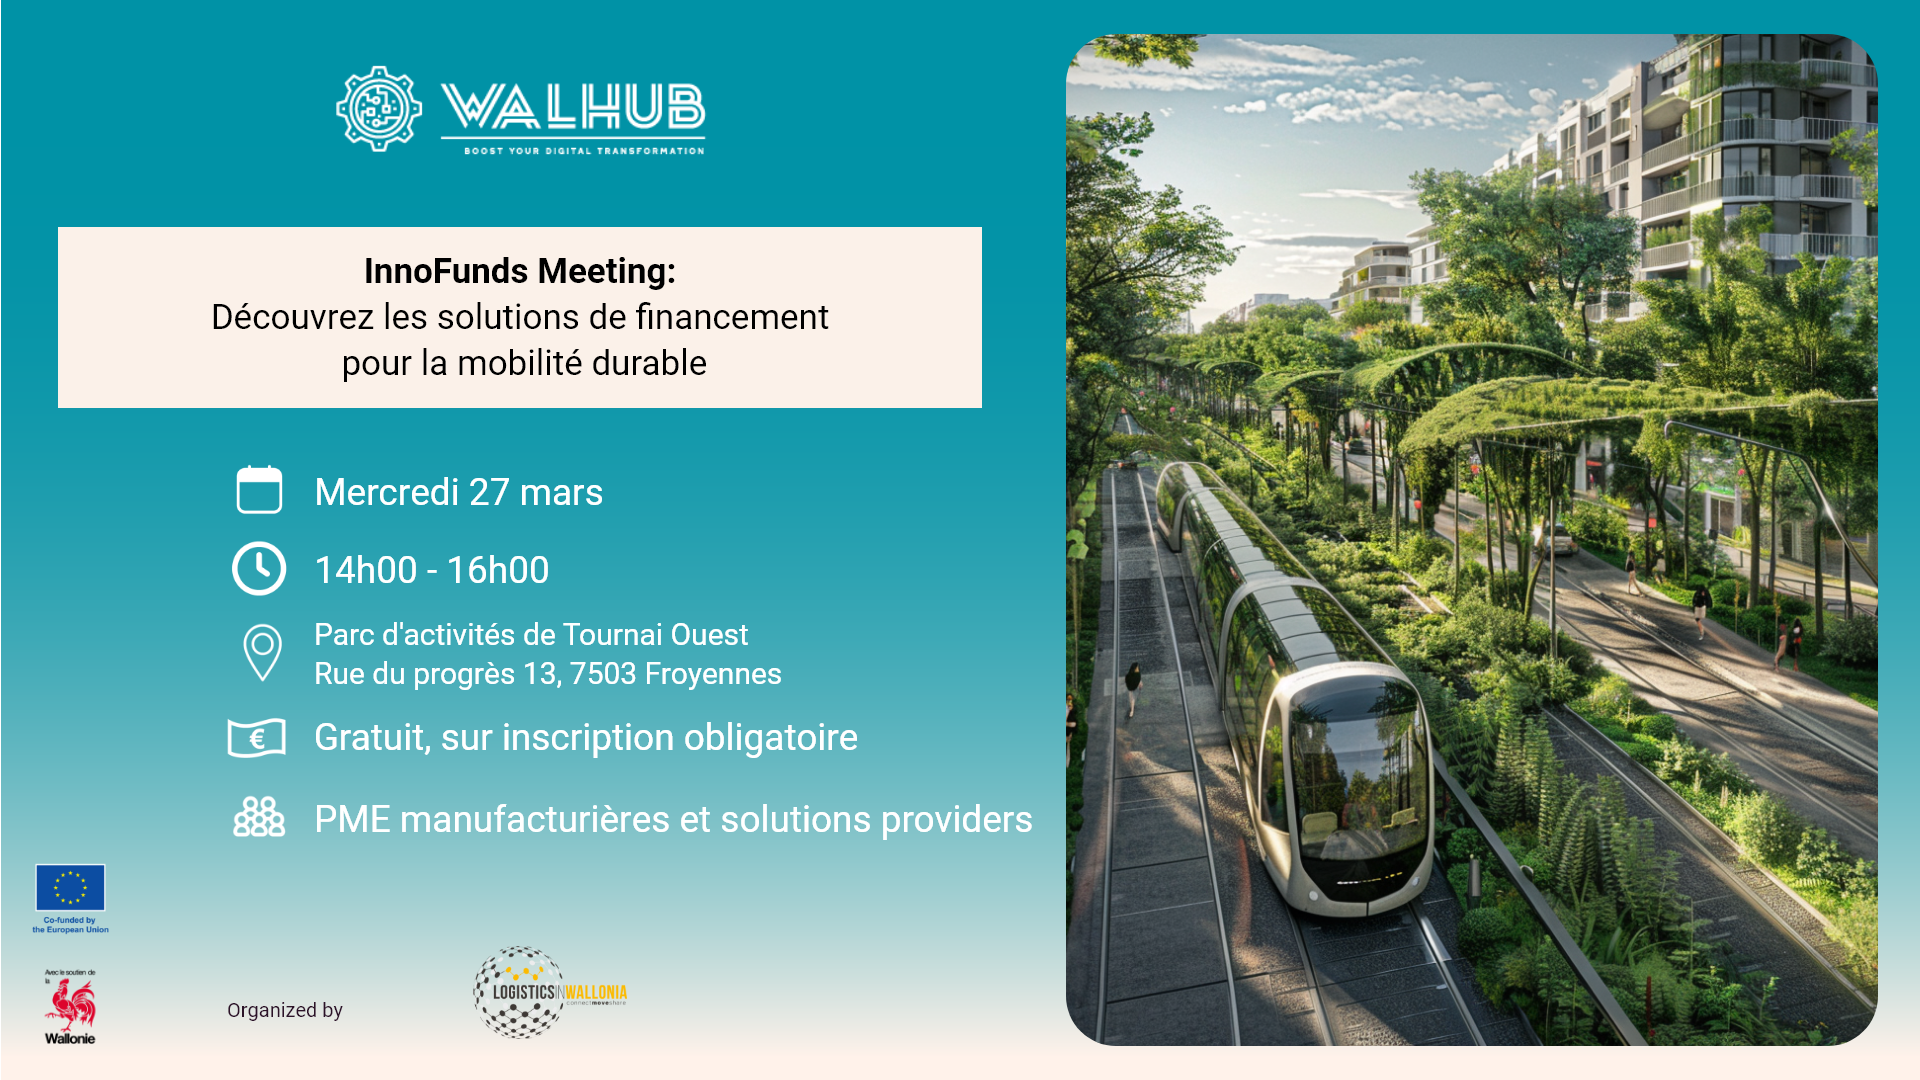 InnoFunds Meeting: Discover financing solutions for sustainable mobility